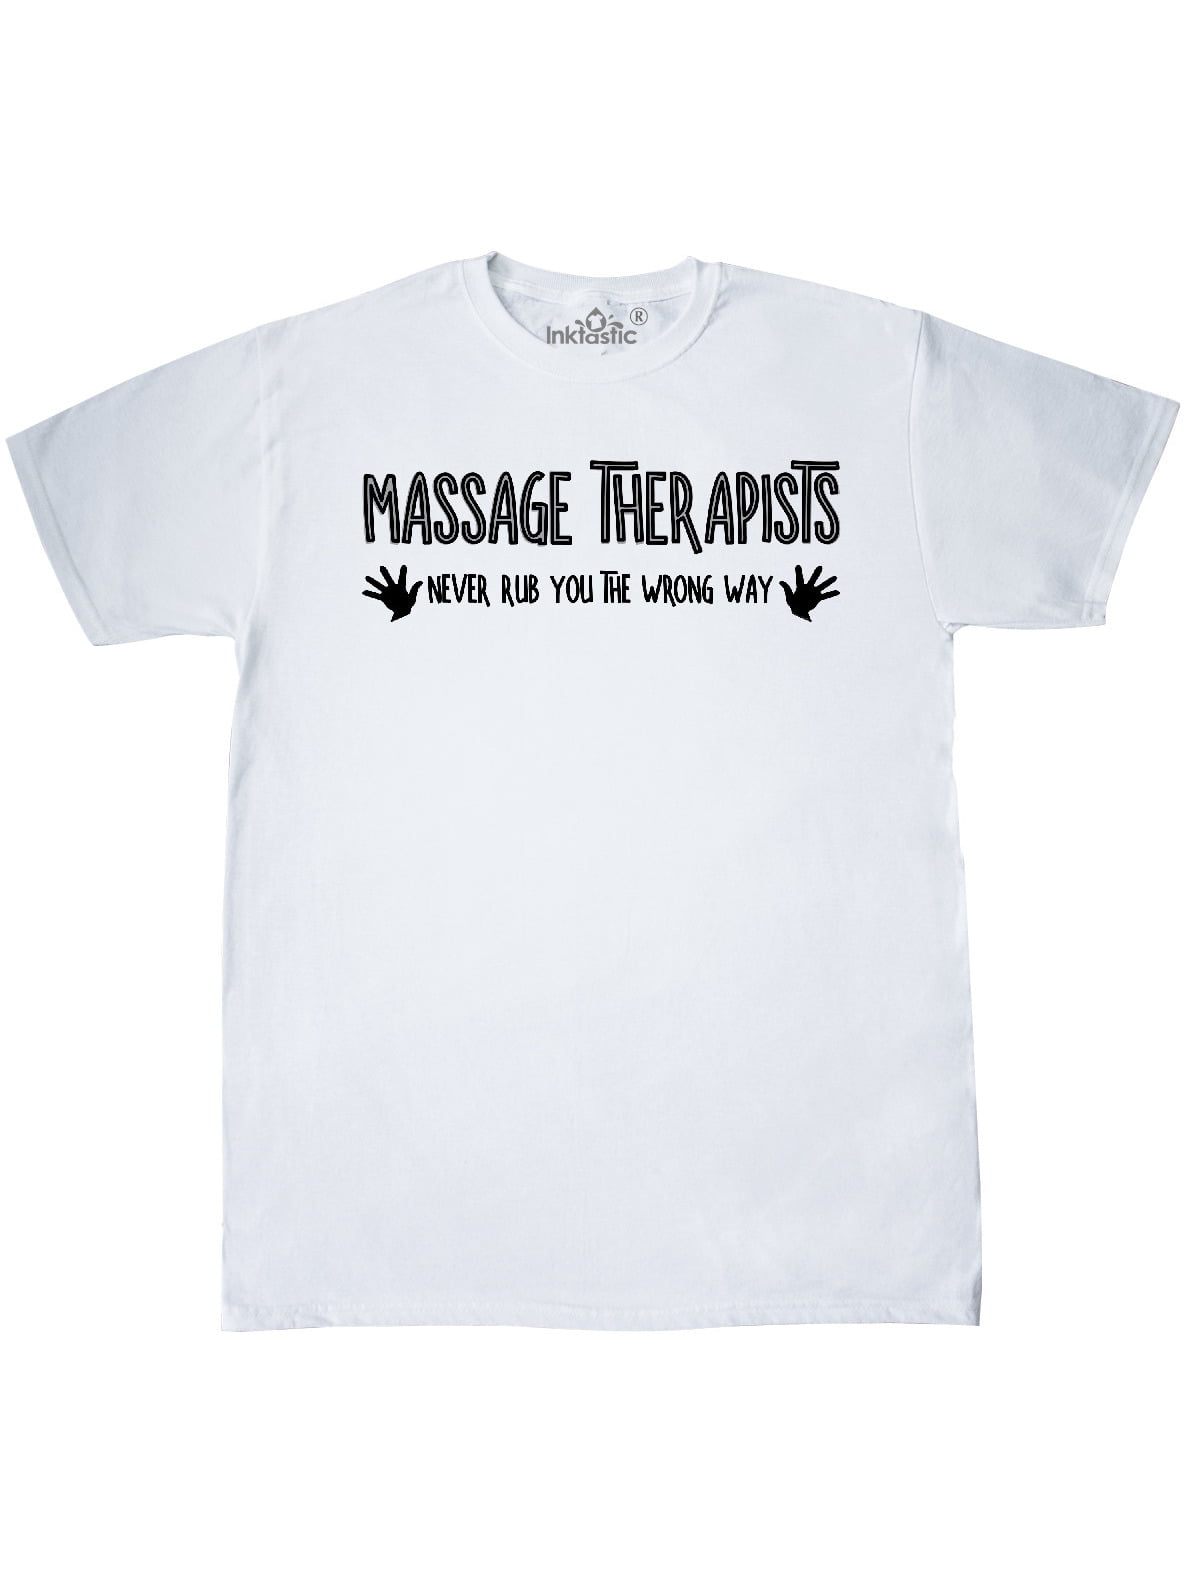 Master Massage Therapist Mens Tee Shirt Pick Size Color Small-6XL 